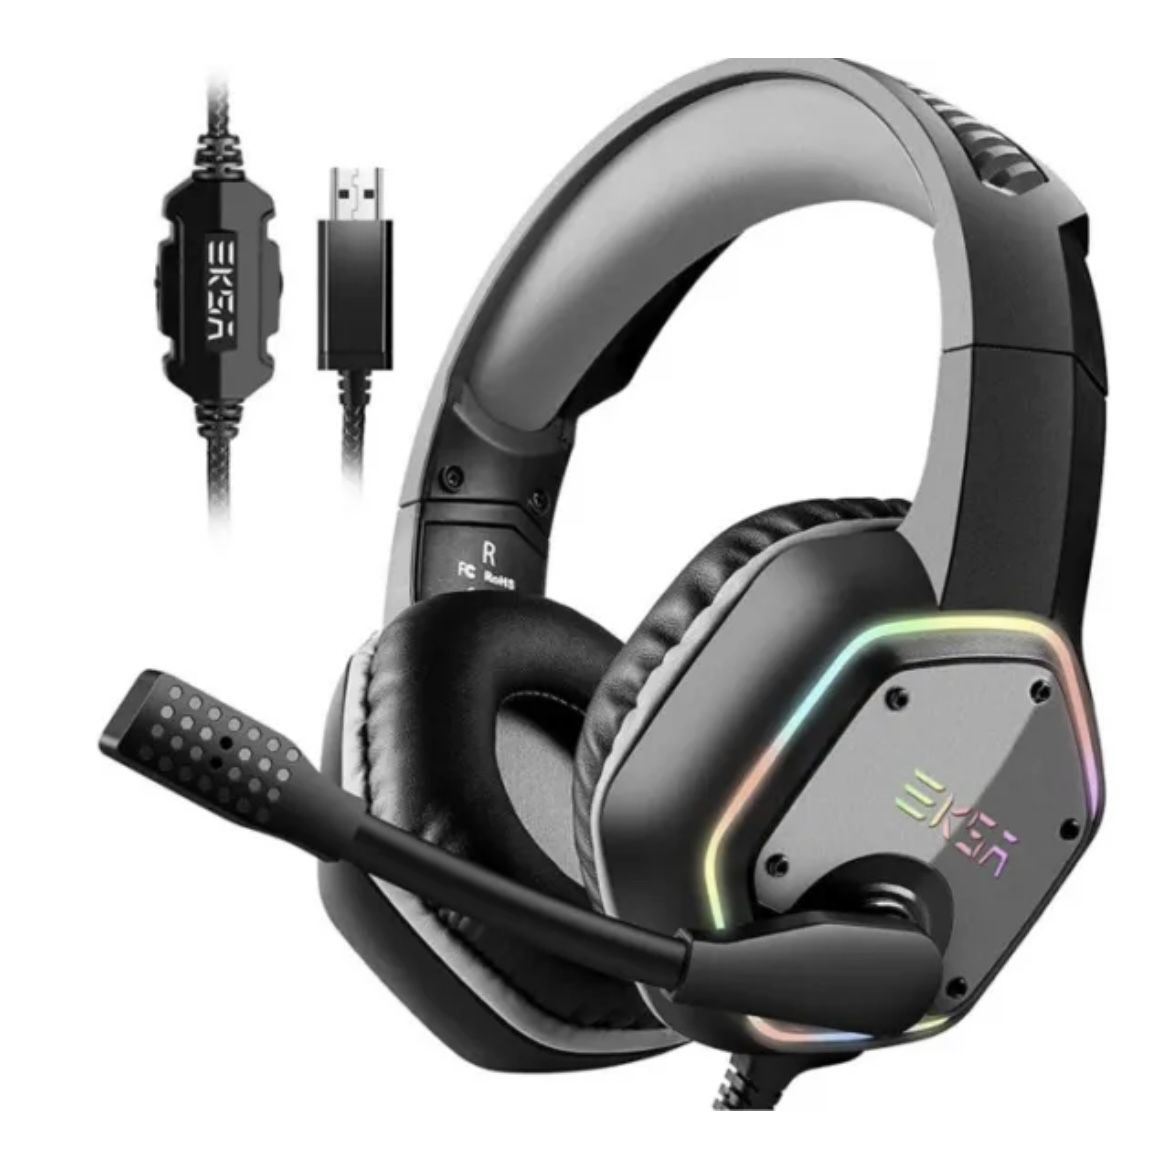 EKSA E1000 USB Gaming Headset - PS4 PC MAC - 7.1 Surround - Pouch Included